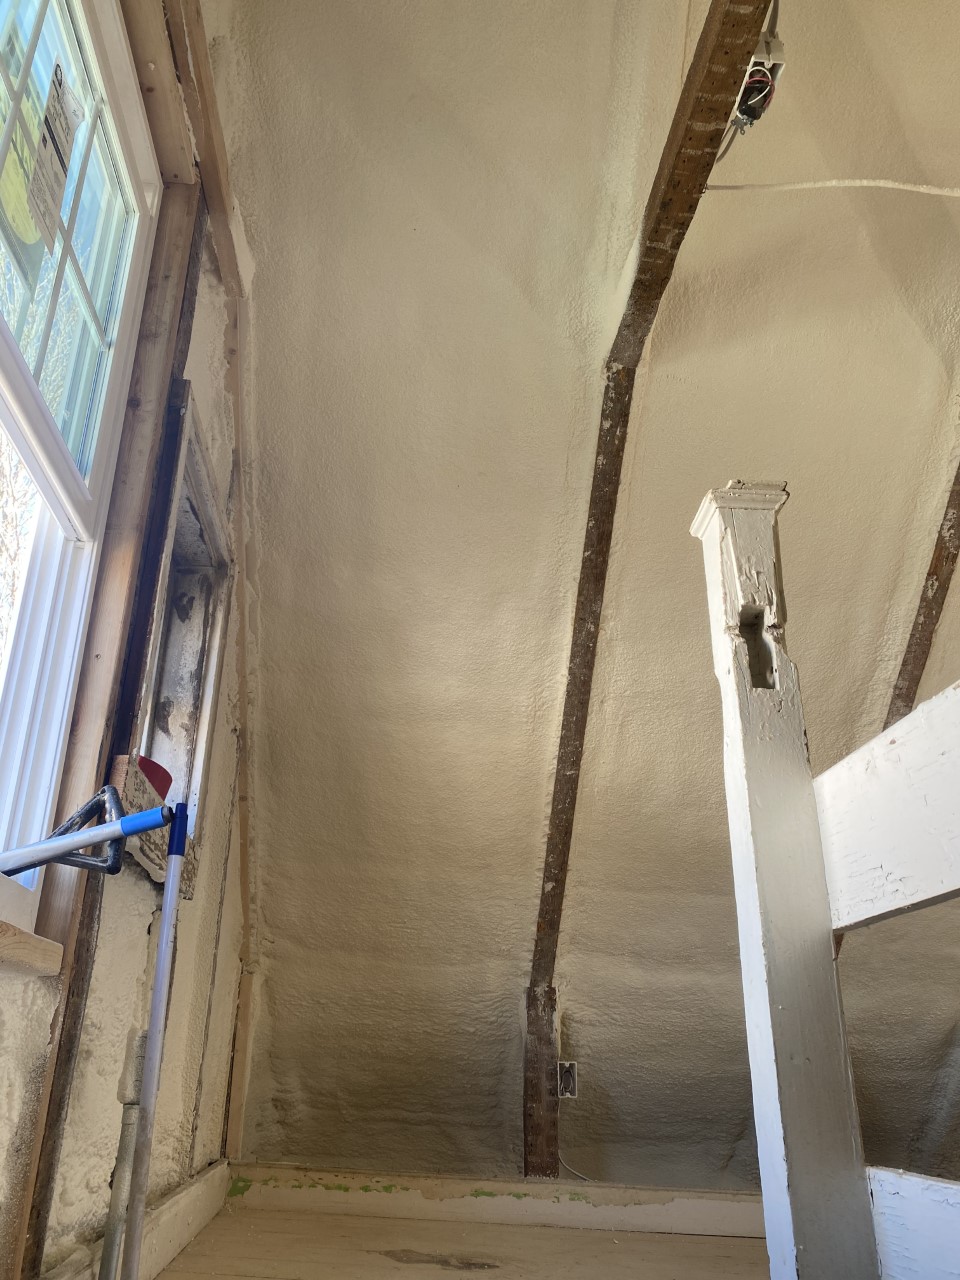 Ceiling insulated with spray foam insulation for energy efficiency